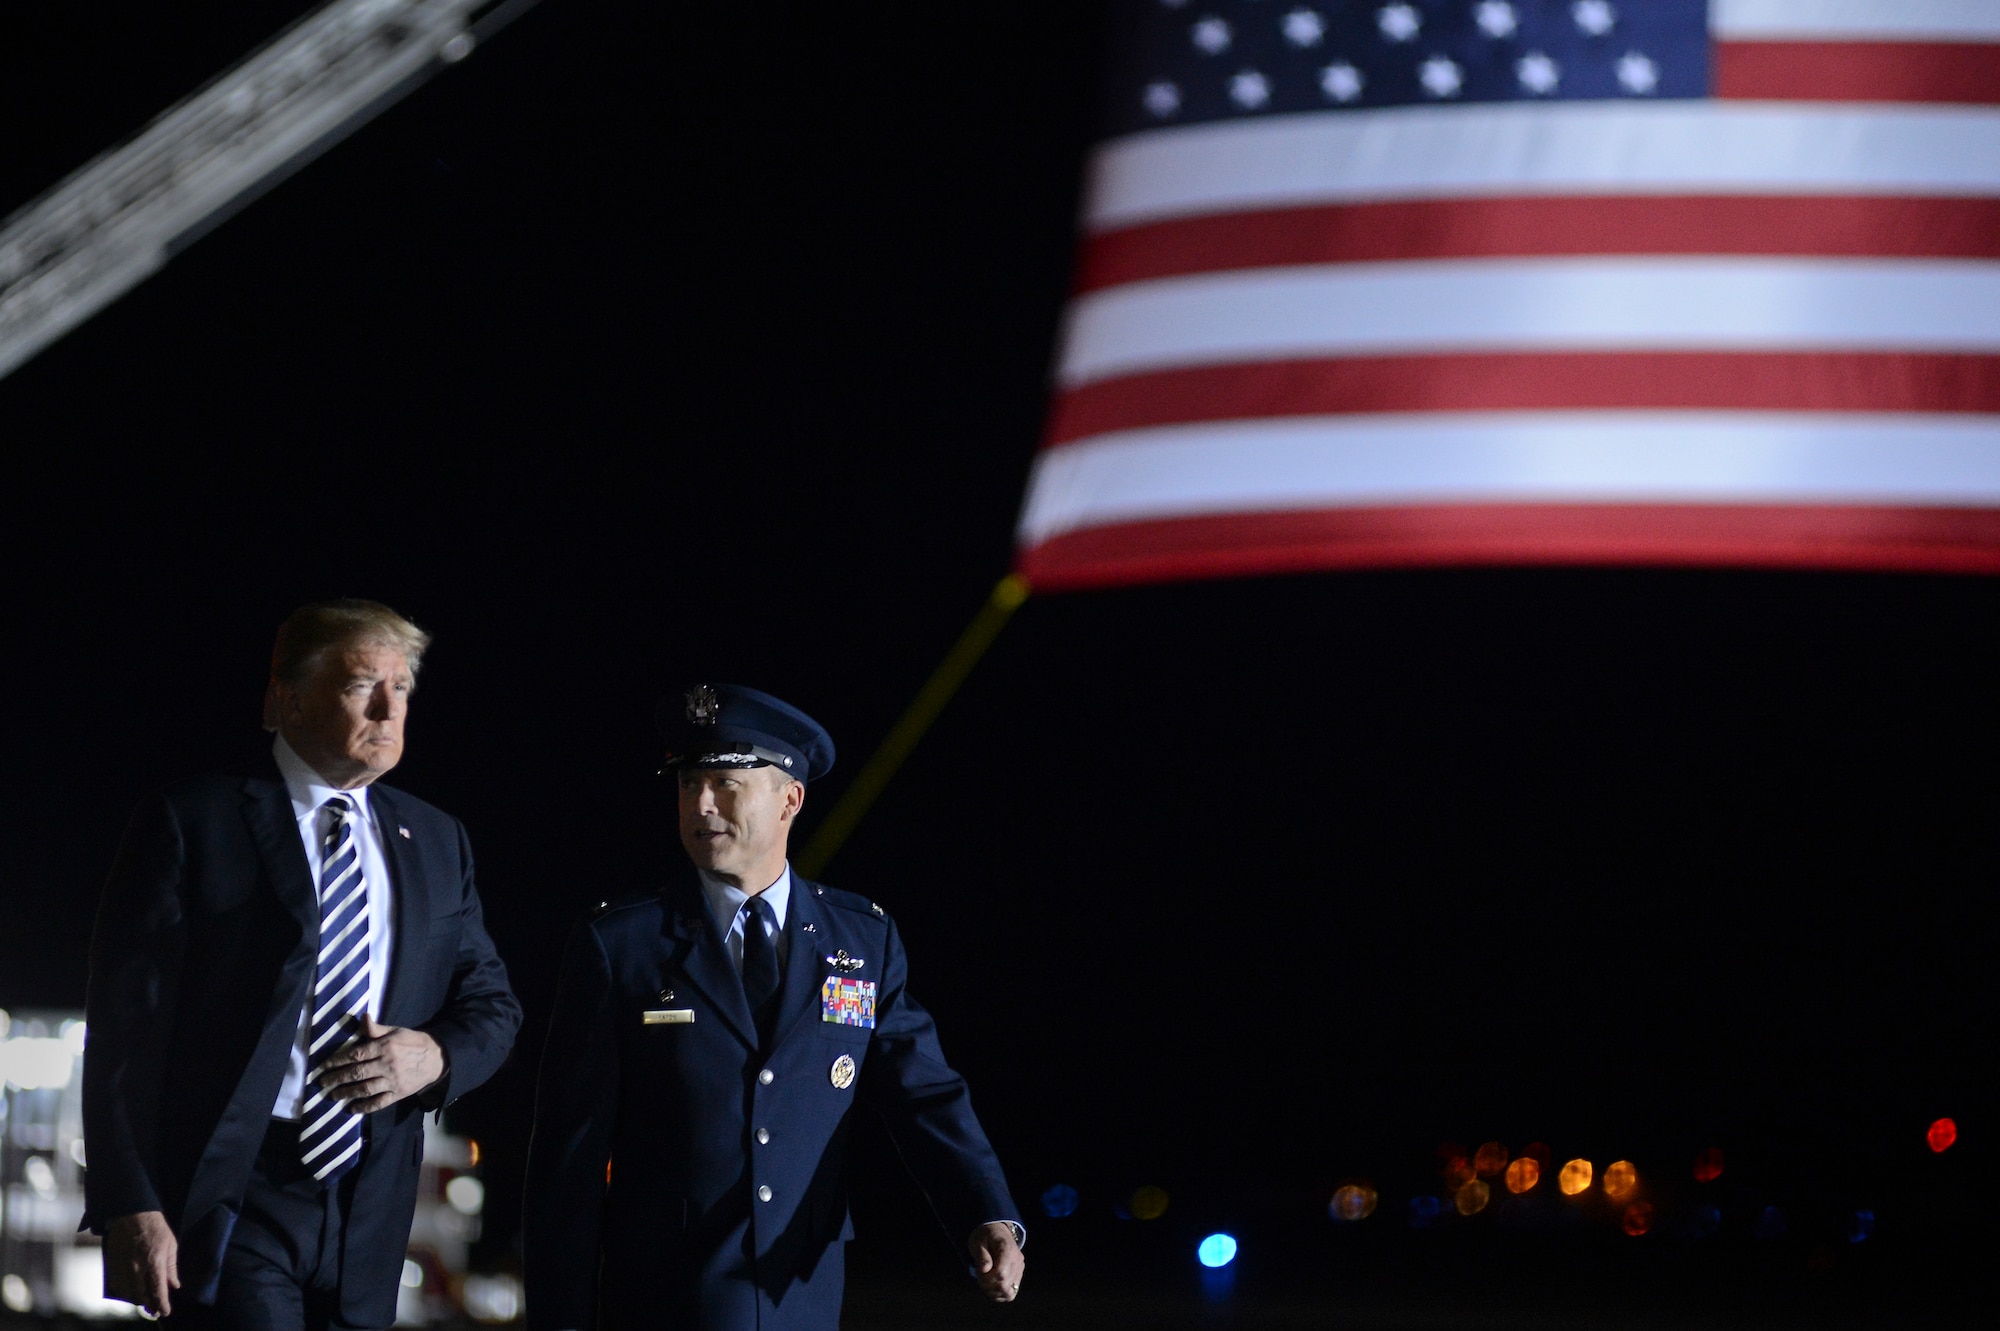 President of the United States Donald J. Trump walks with Col. Casey D. Eaton, 89th Airlift Wing commander at Joint Base Andrews, Md., May 10, 2018, as they prepare to greet three Americans who were freed from North Korea on May 9. An 89th AW C-40 high-priority personnel transport aircraft carried Kim Dong-chul, Tony Kim and Kim Hak-song from North Korea to Anchorage, Alaska, where the plane refueled before arriving at JB Andrews. The 89th AW executes special missions such as these on a routine basis while enabling national interests through global transportation for America's senior leaders. (U.S. Air Force photo by Staff Sgt. Kenny Holston)